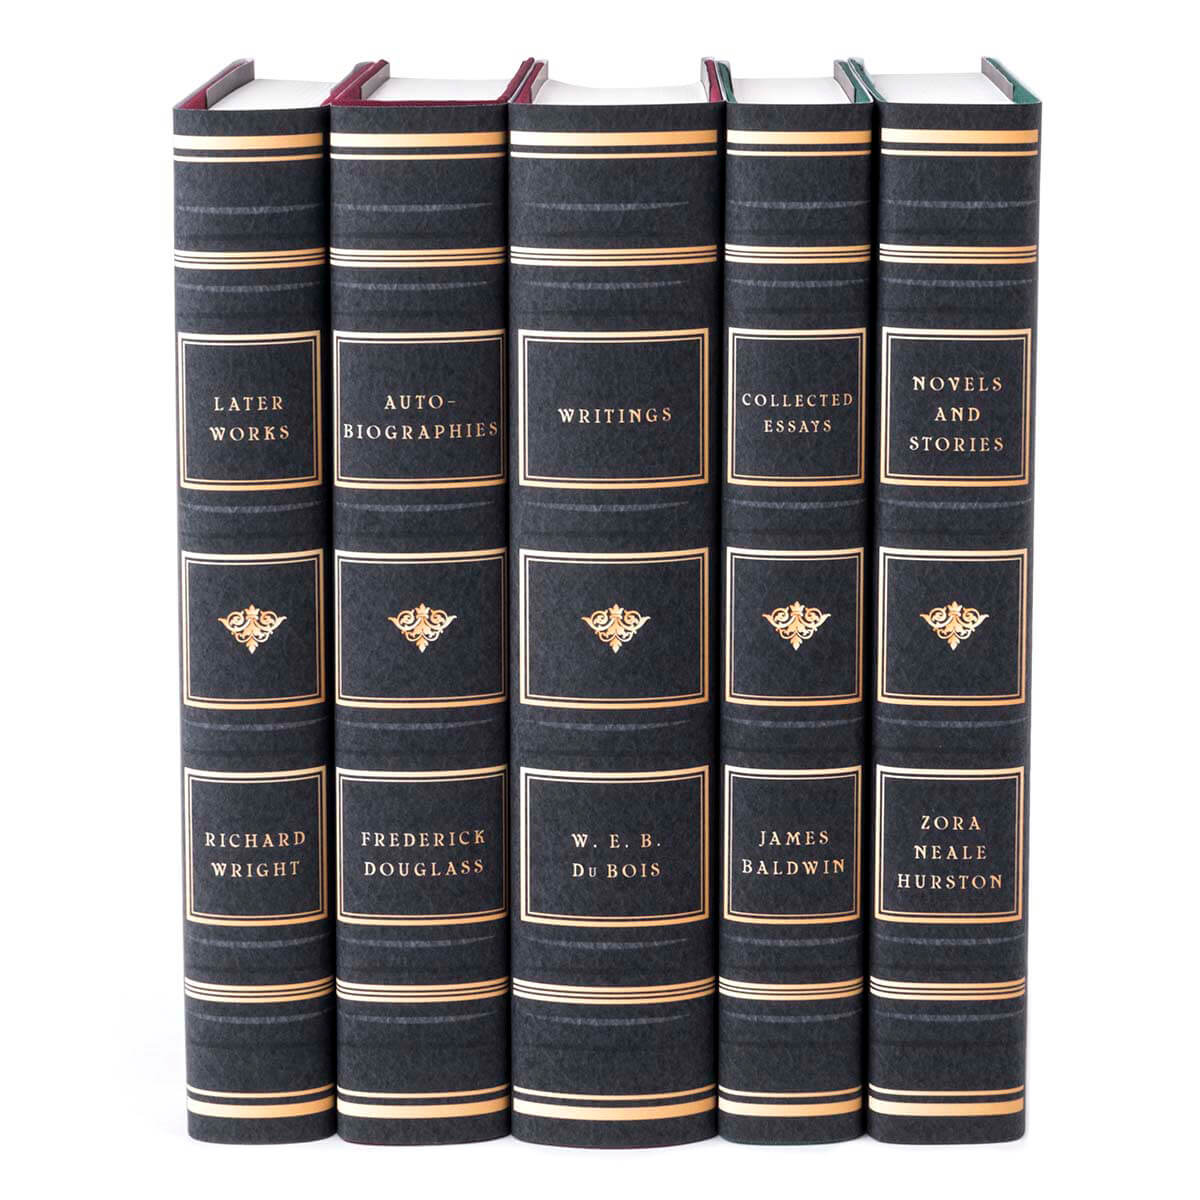 3 Unexpected Places To Find Beautiful Book Sets Online